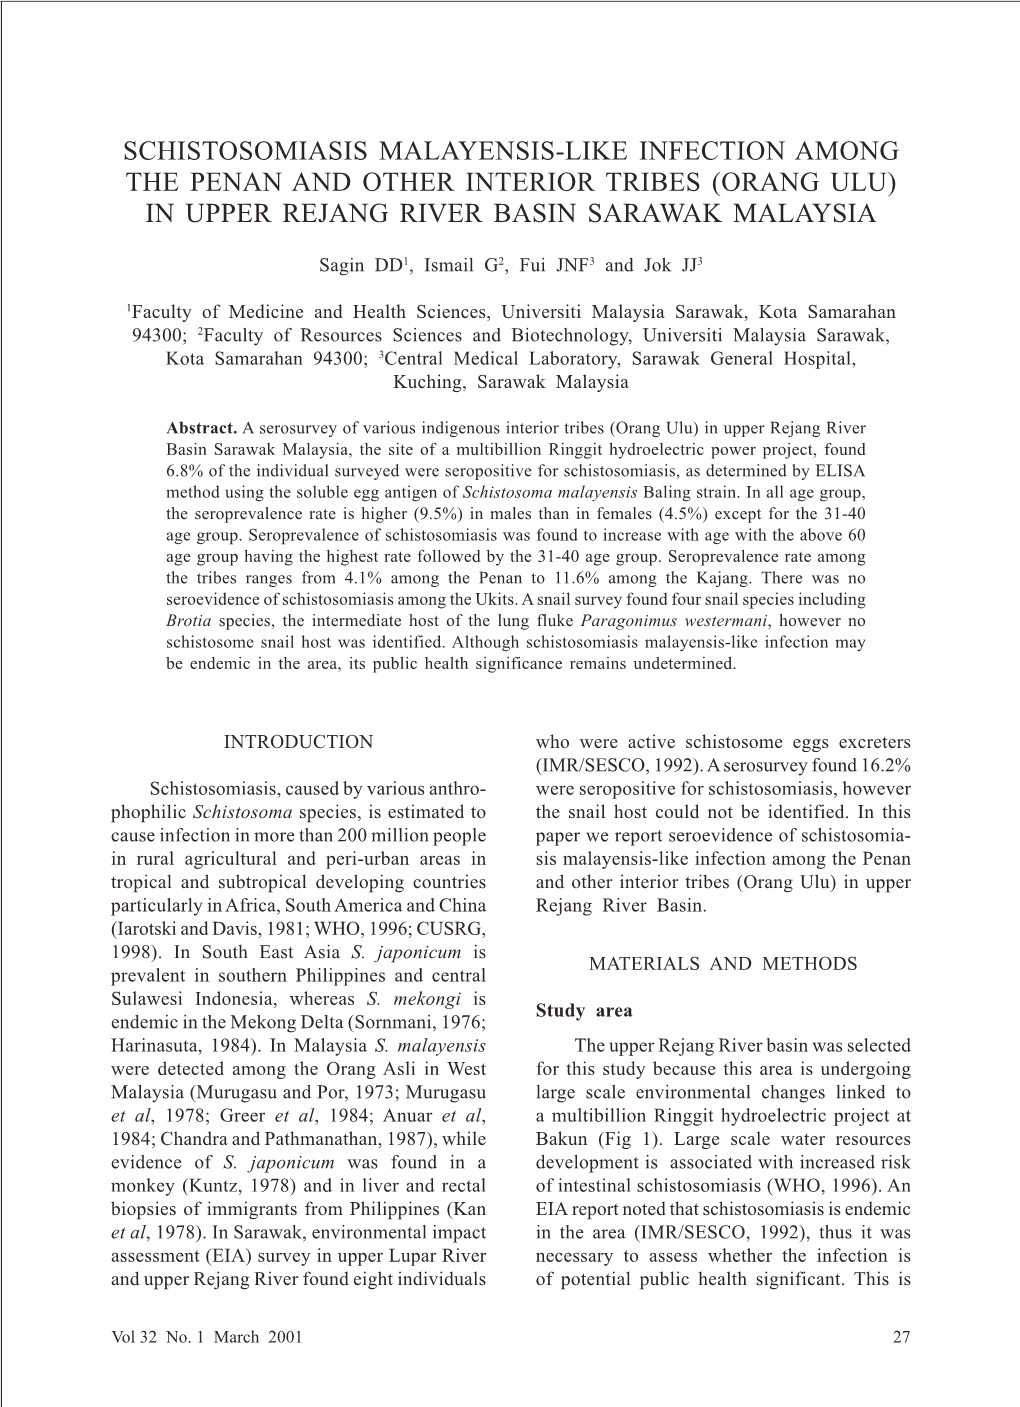 Schistosomiasis Malayensis-Like Infection Among the Penan and Other Interior Tribes (Orang Ulu) in Upper Rejang River Basin Sarawak Malaysia